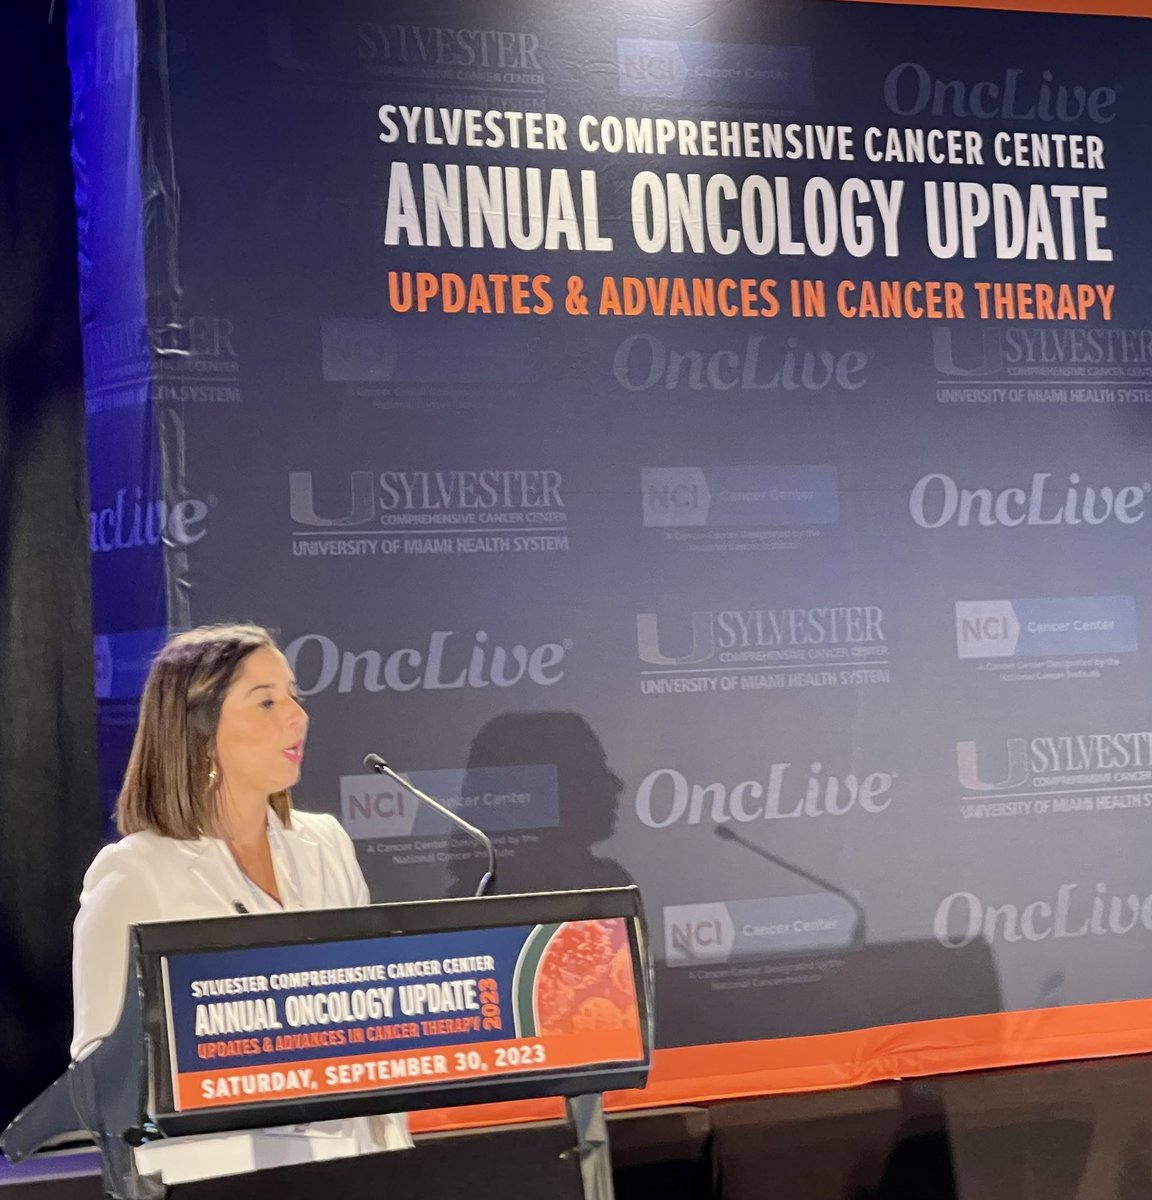 Dr @COlazagasti continues our lung cancer session discussing targeted therapies update from #ASCO23 and #WCLC23 @SylvesterCancer @OncLive @AmanChauhanMD @DrMudad @NarjustFlorezMD